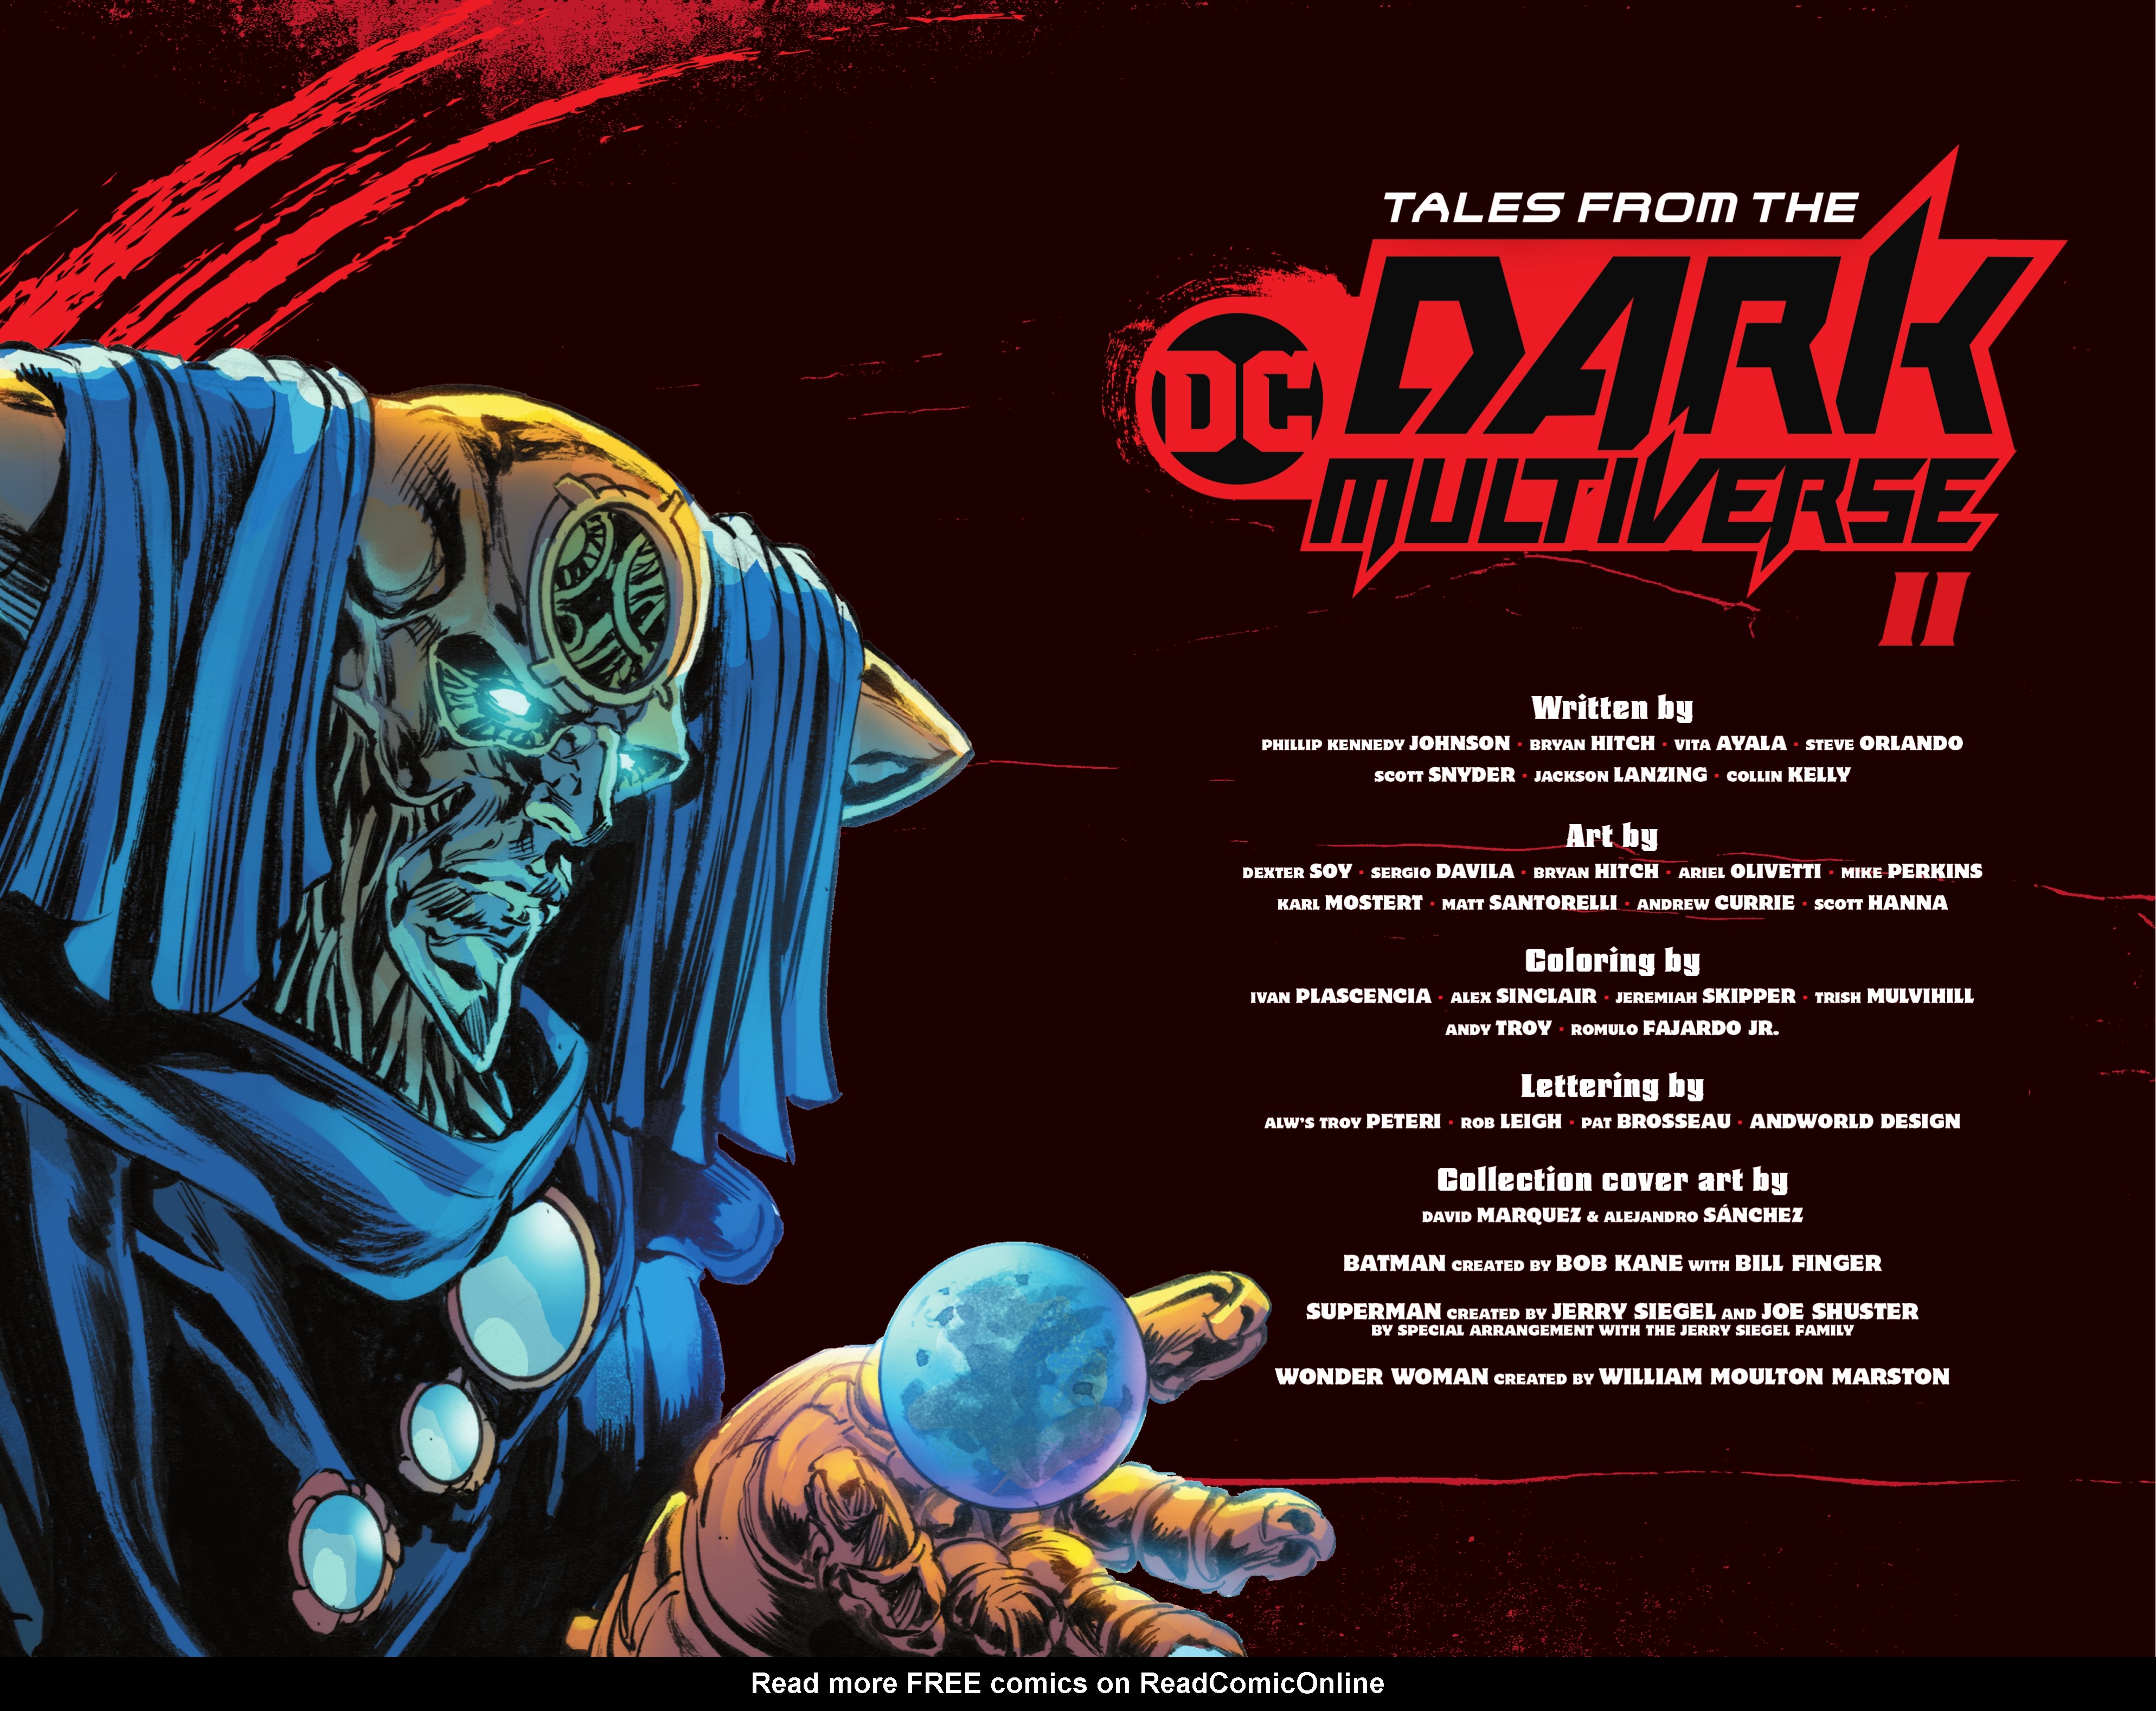 Read online Tales From the DC Dark Multiverse II comic -  Issue # TPB (Part 1) - 5